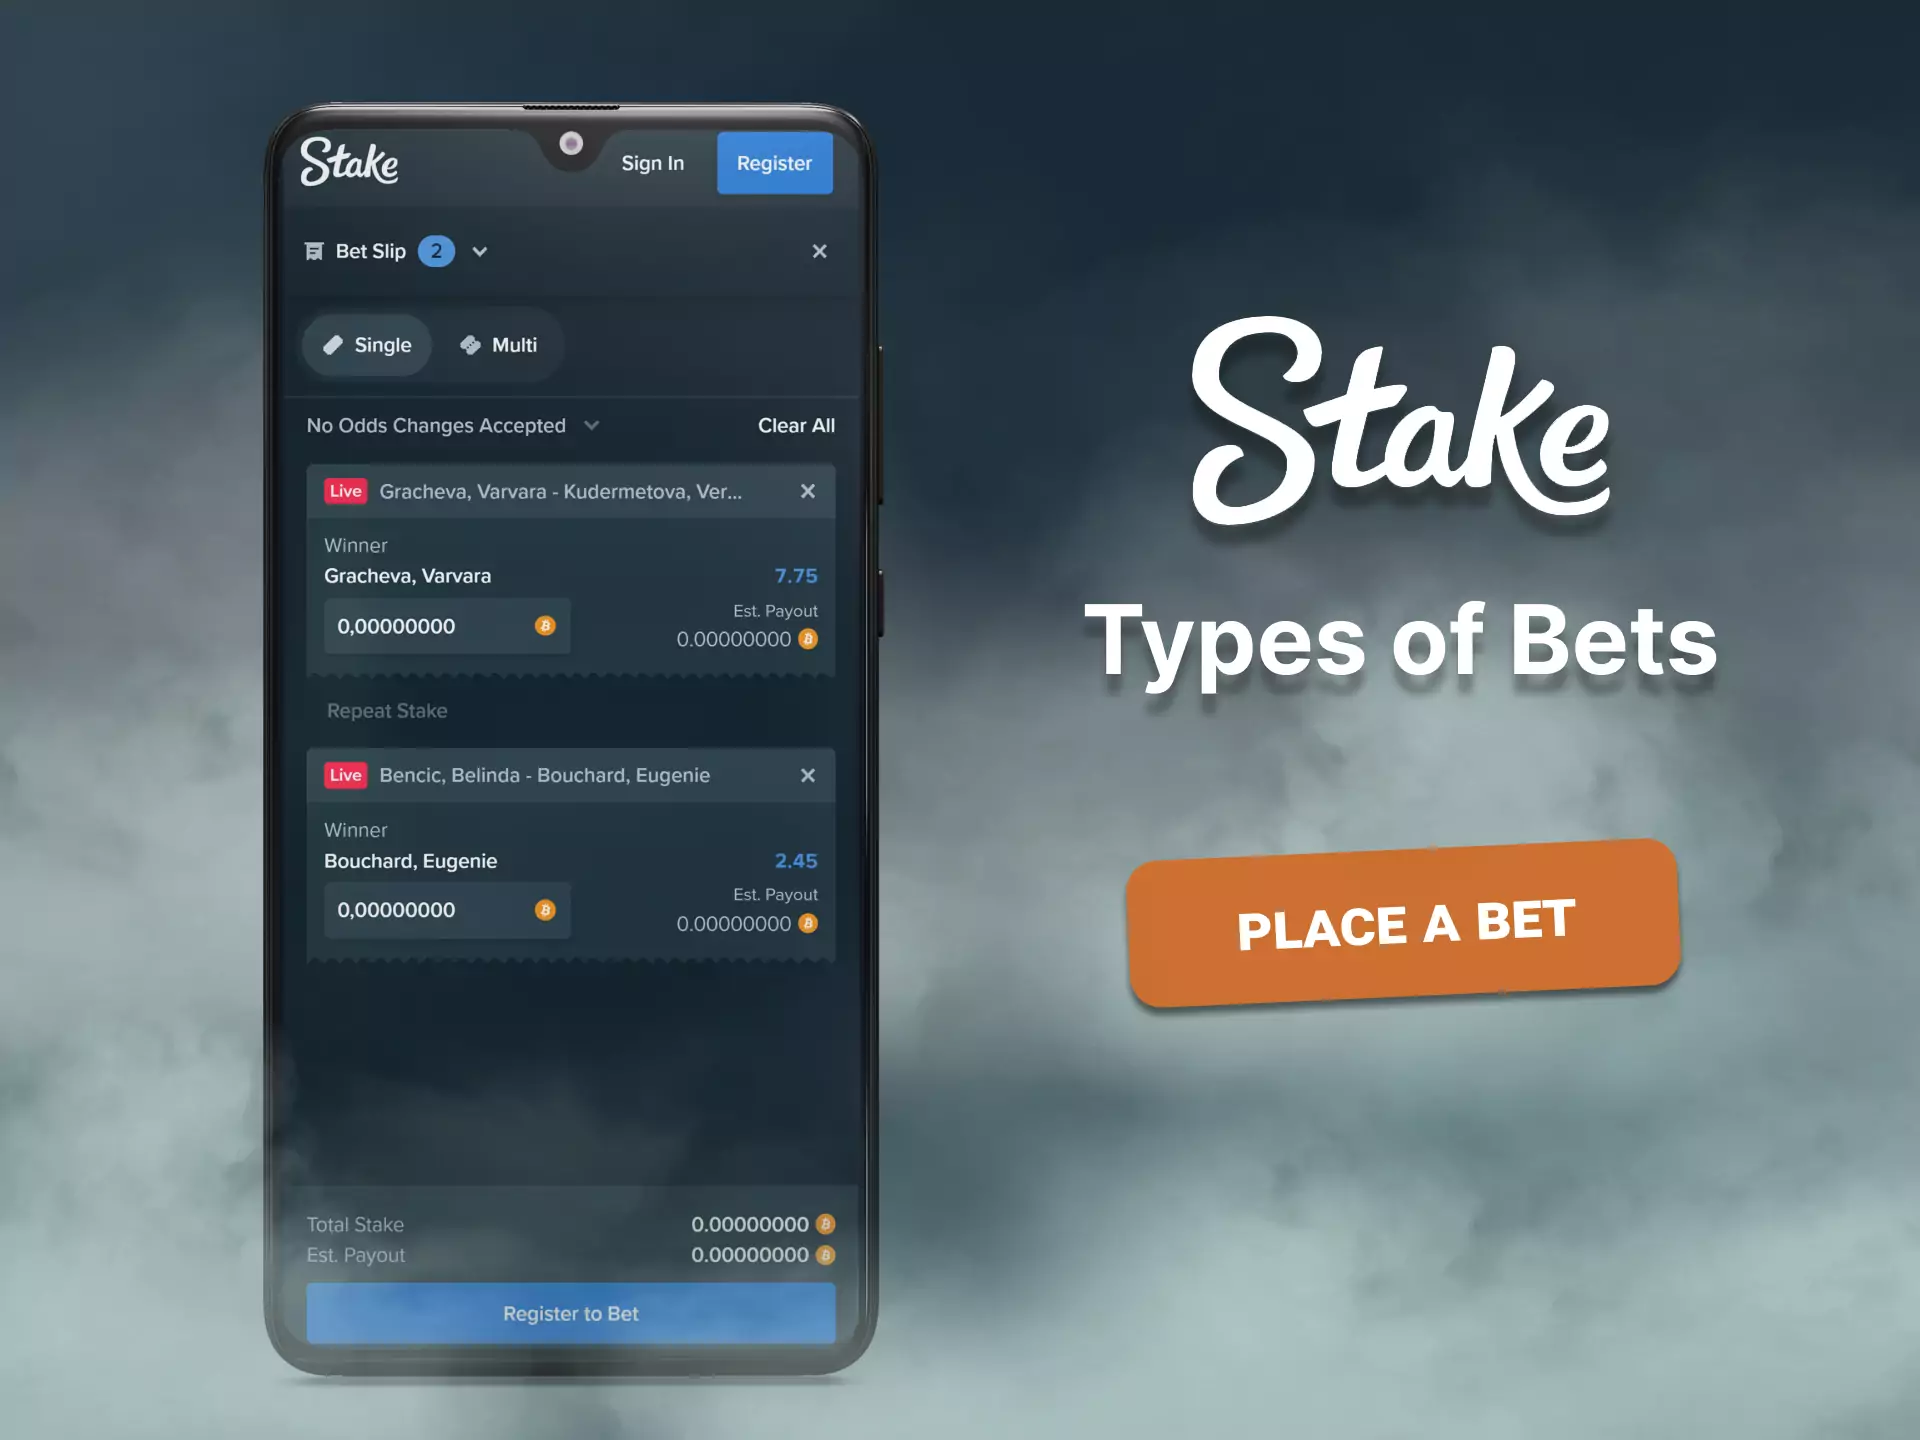 Try different types of bets in Stake.com.